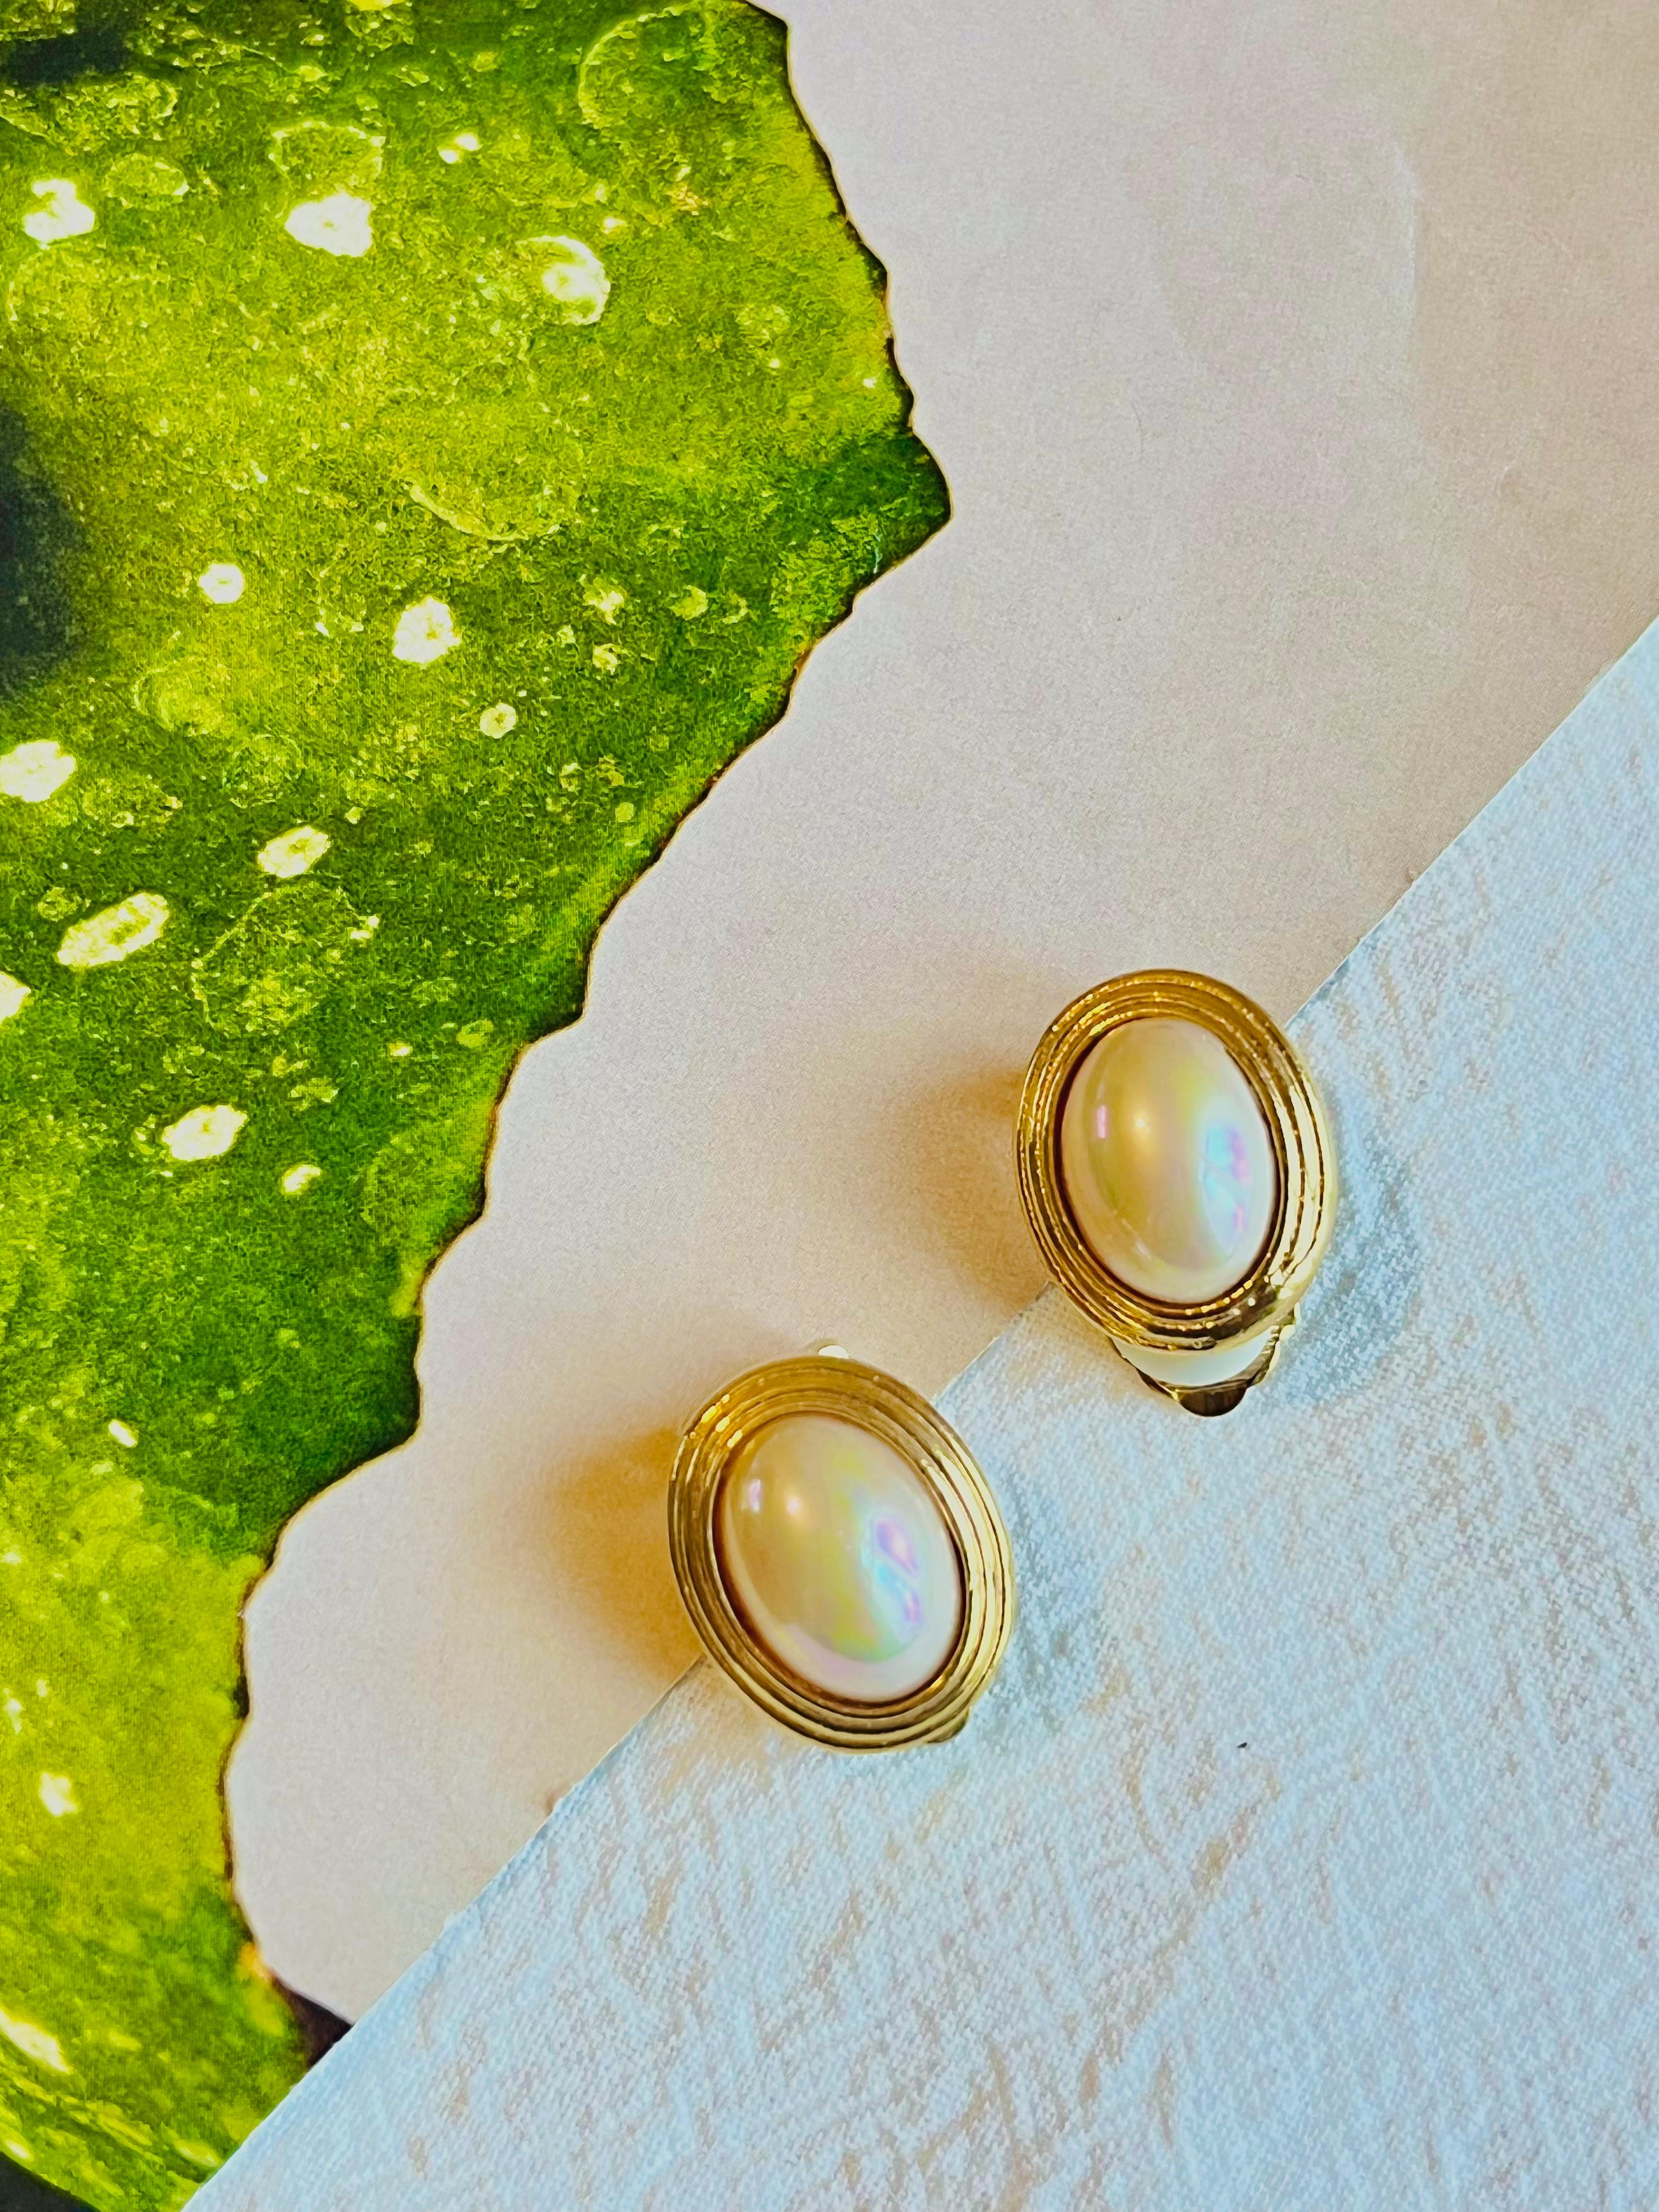 Christian Dior Vintage 1980s Oval Large White Pearl Retro Elegant Clip Earrings In Good Condition For Sale In Wokingham, England